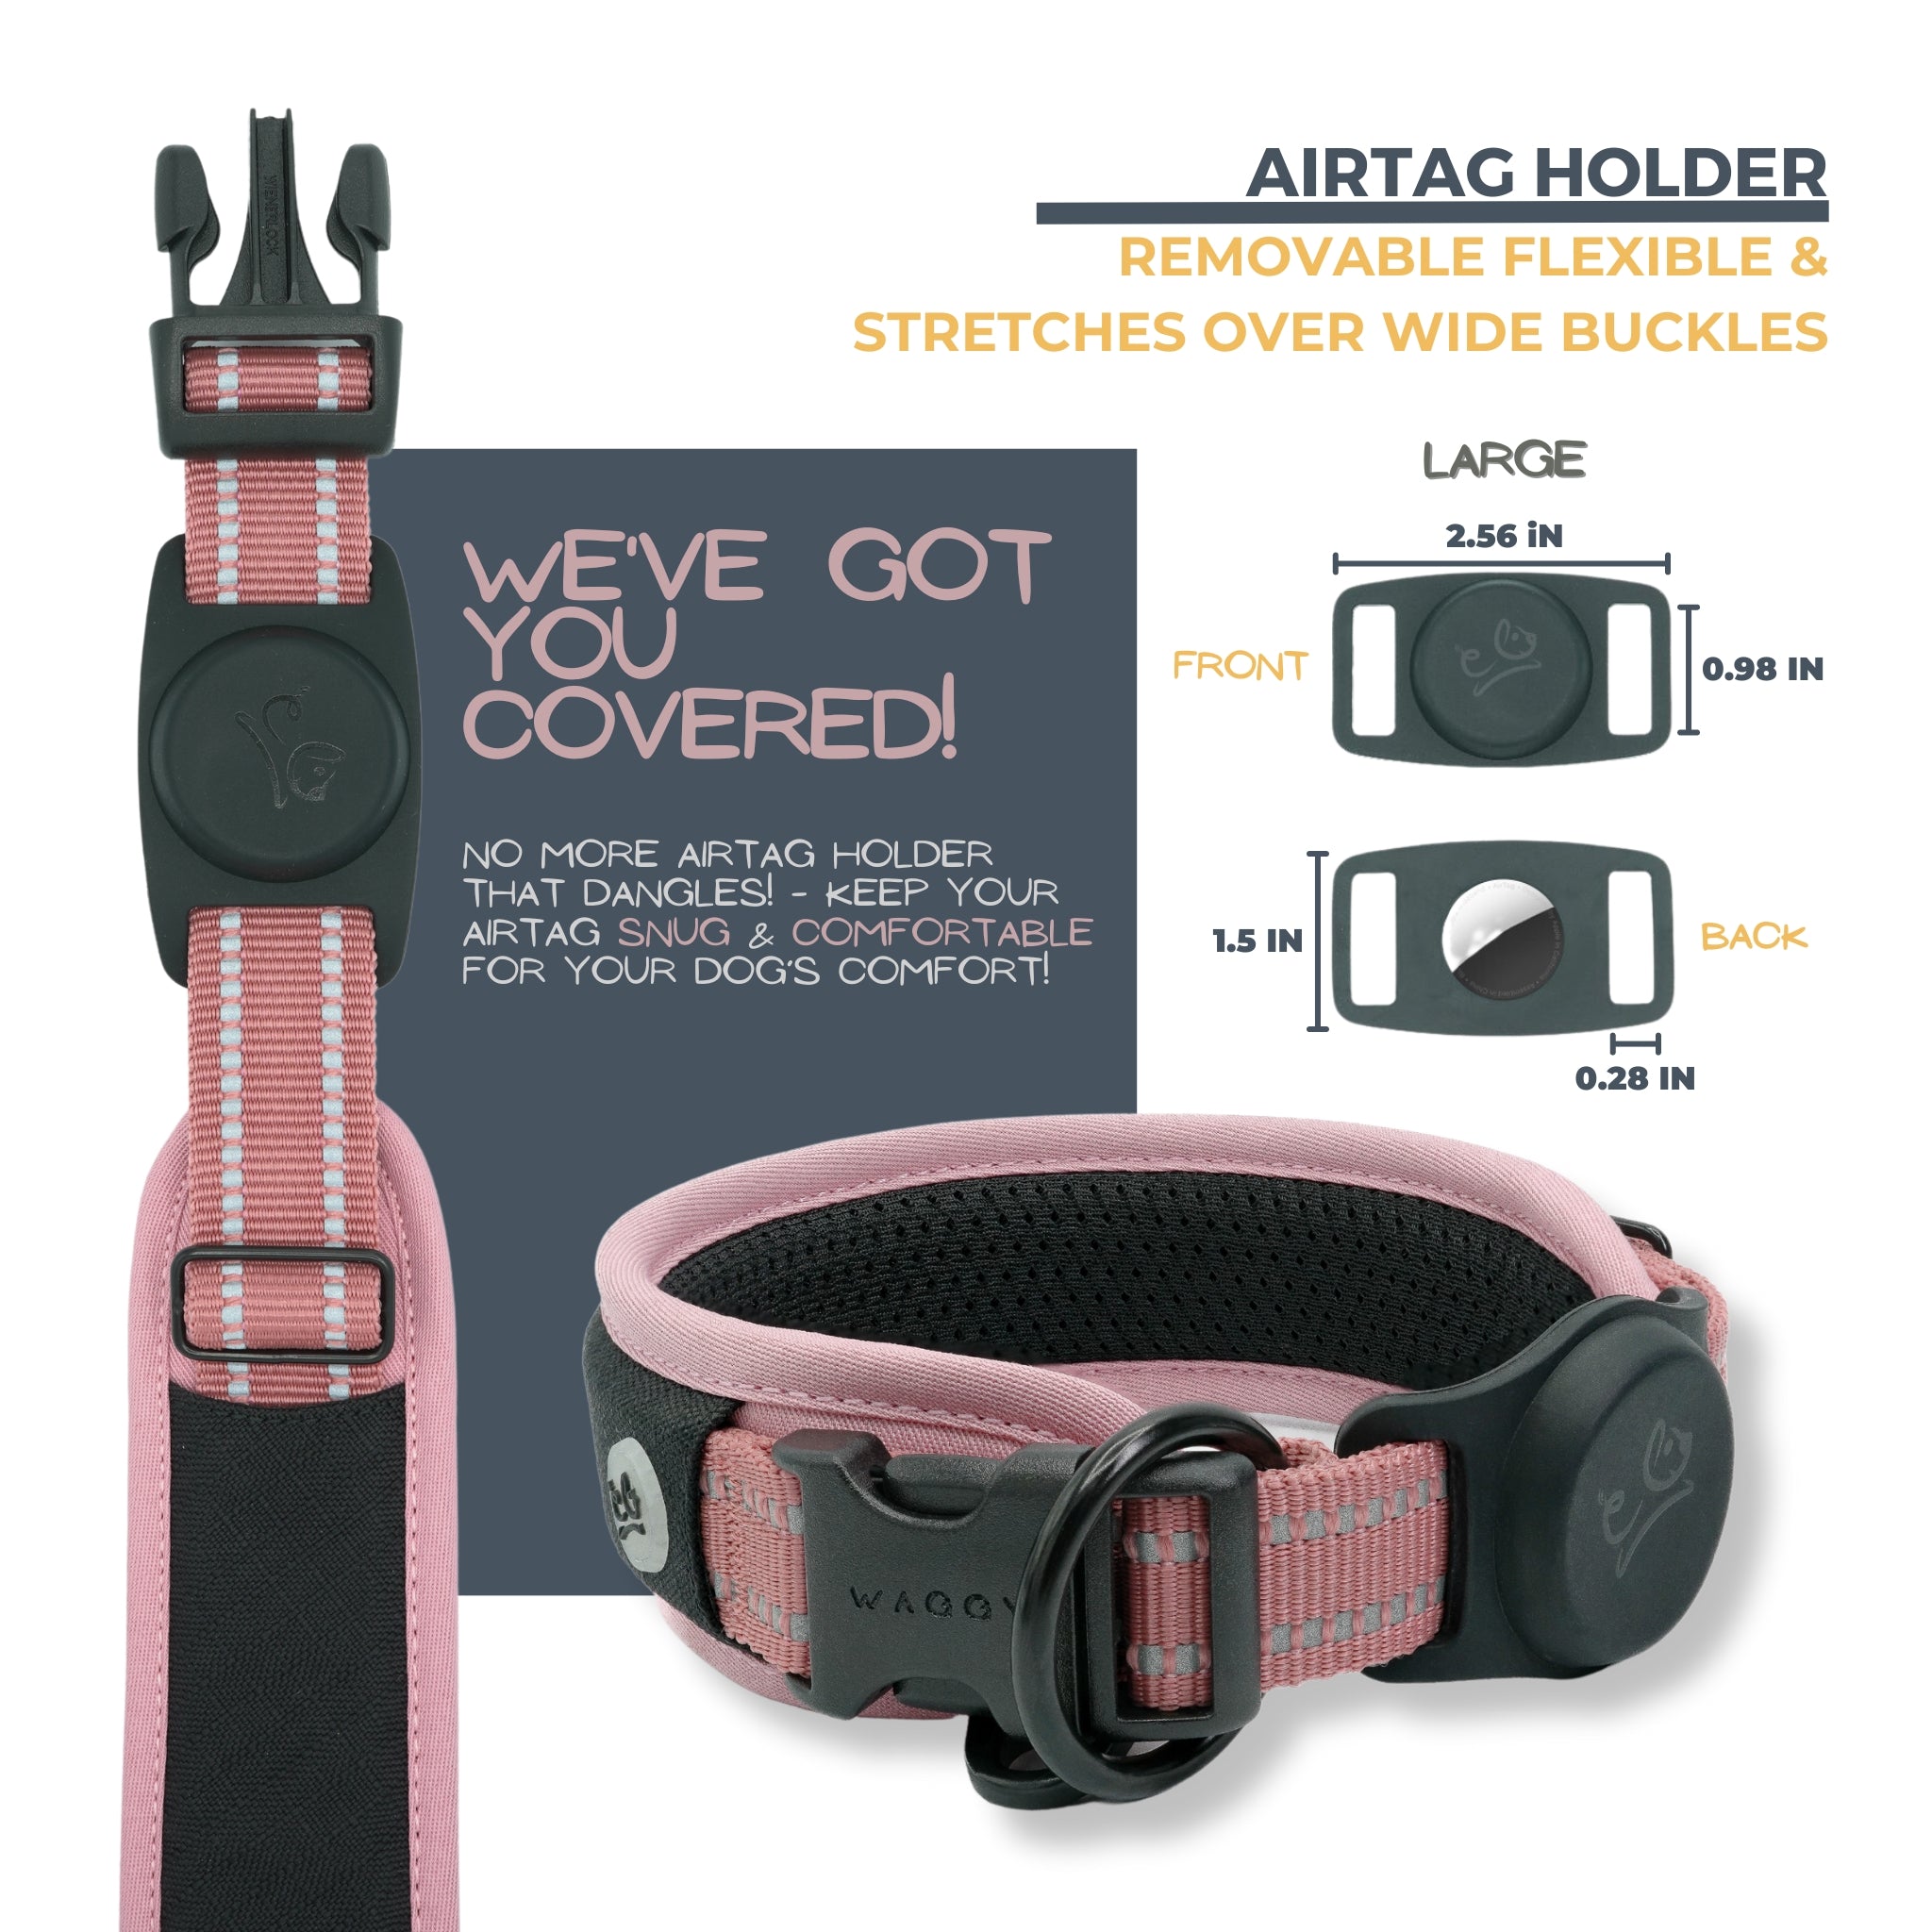 Pink Air Mesh dog collar Airtag holder details. Removable; flexible; stretches over wide buckles. Airtag Holder exact measurements and shows a black collar with Airtag holder. No more Airtag holder that dangles. Airtag is to be snug &amp; comfortable for your dog&#39;s comfort.